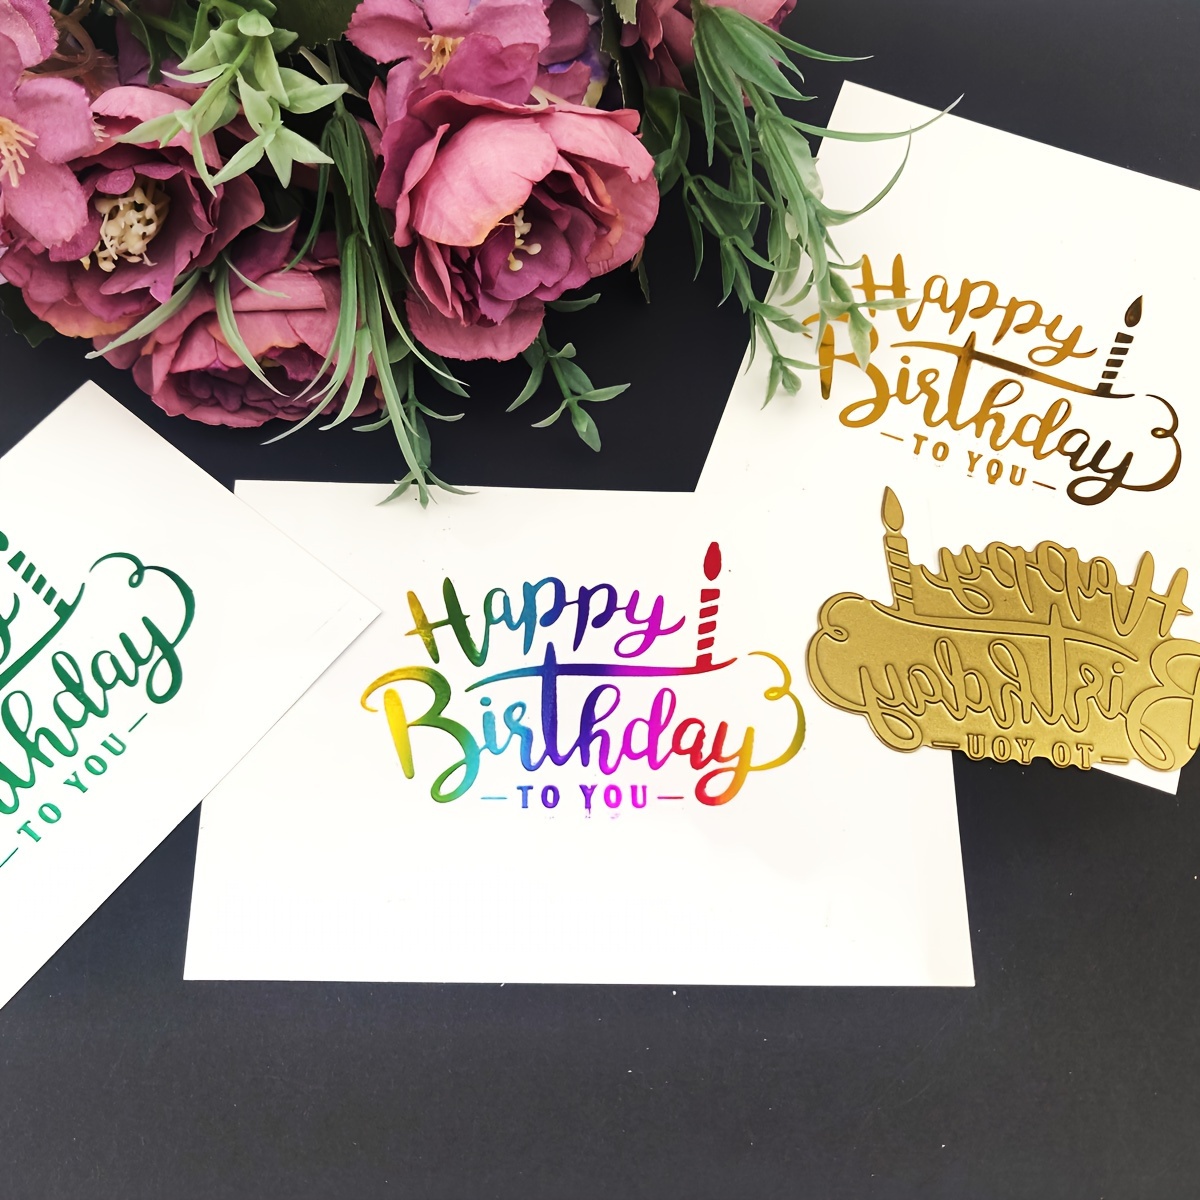 

Alinacutle Metal Cutting Die & Hot Foil Plate - Happy Birthday Candle Cake Design For Diy Greeting Cards, Scrapbooking & Invitations Crafting - Greeting Card Decoration Stencil Template By Alinacutle